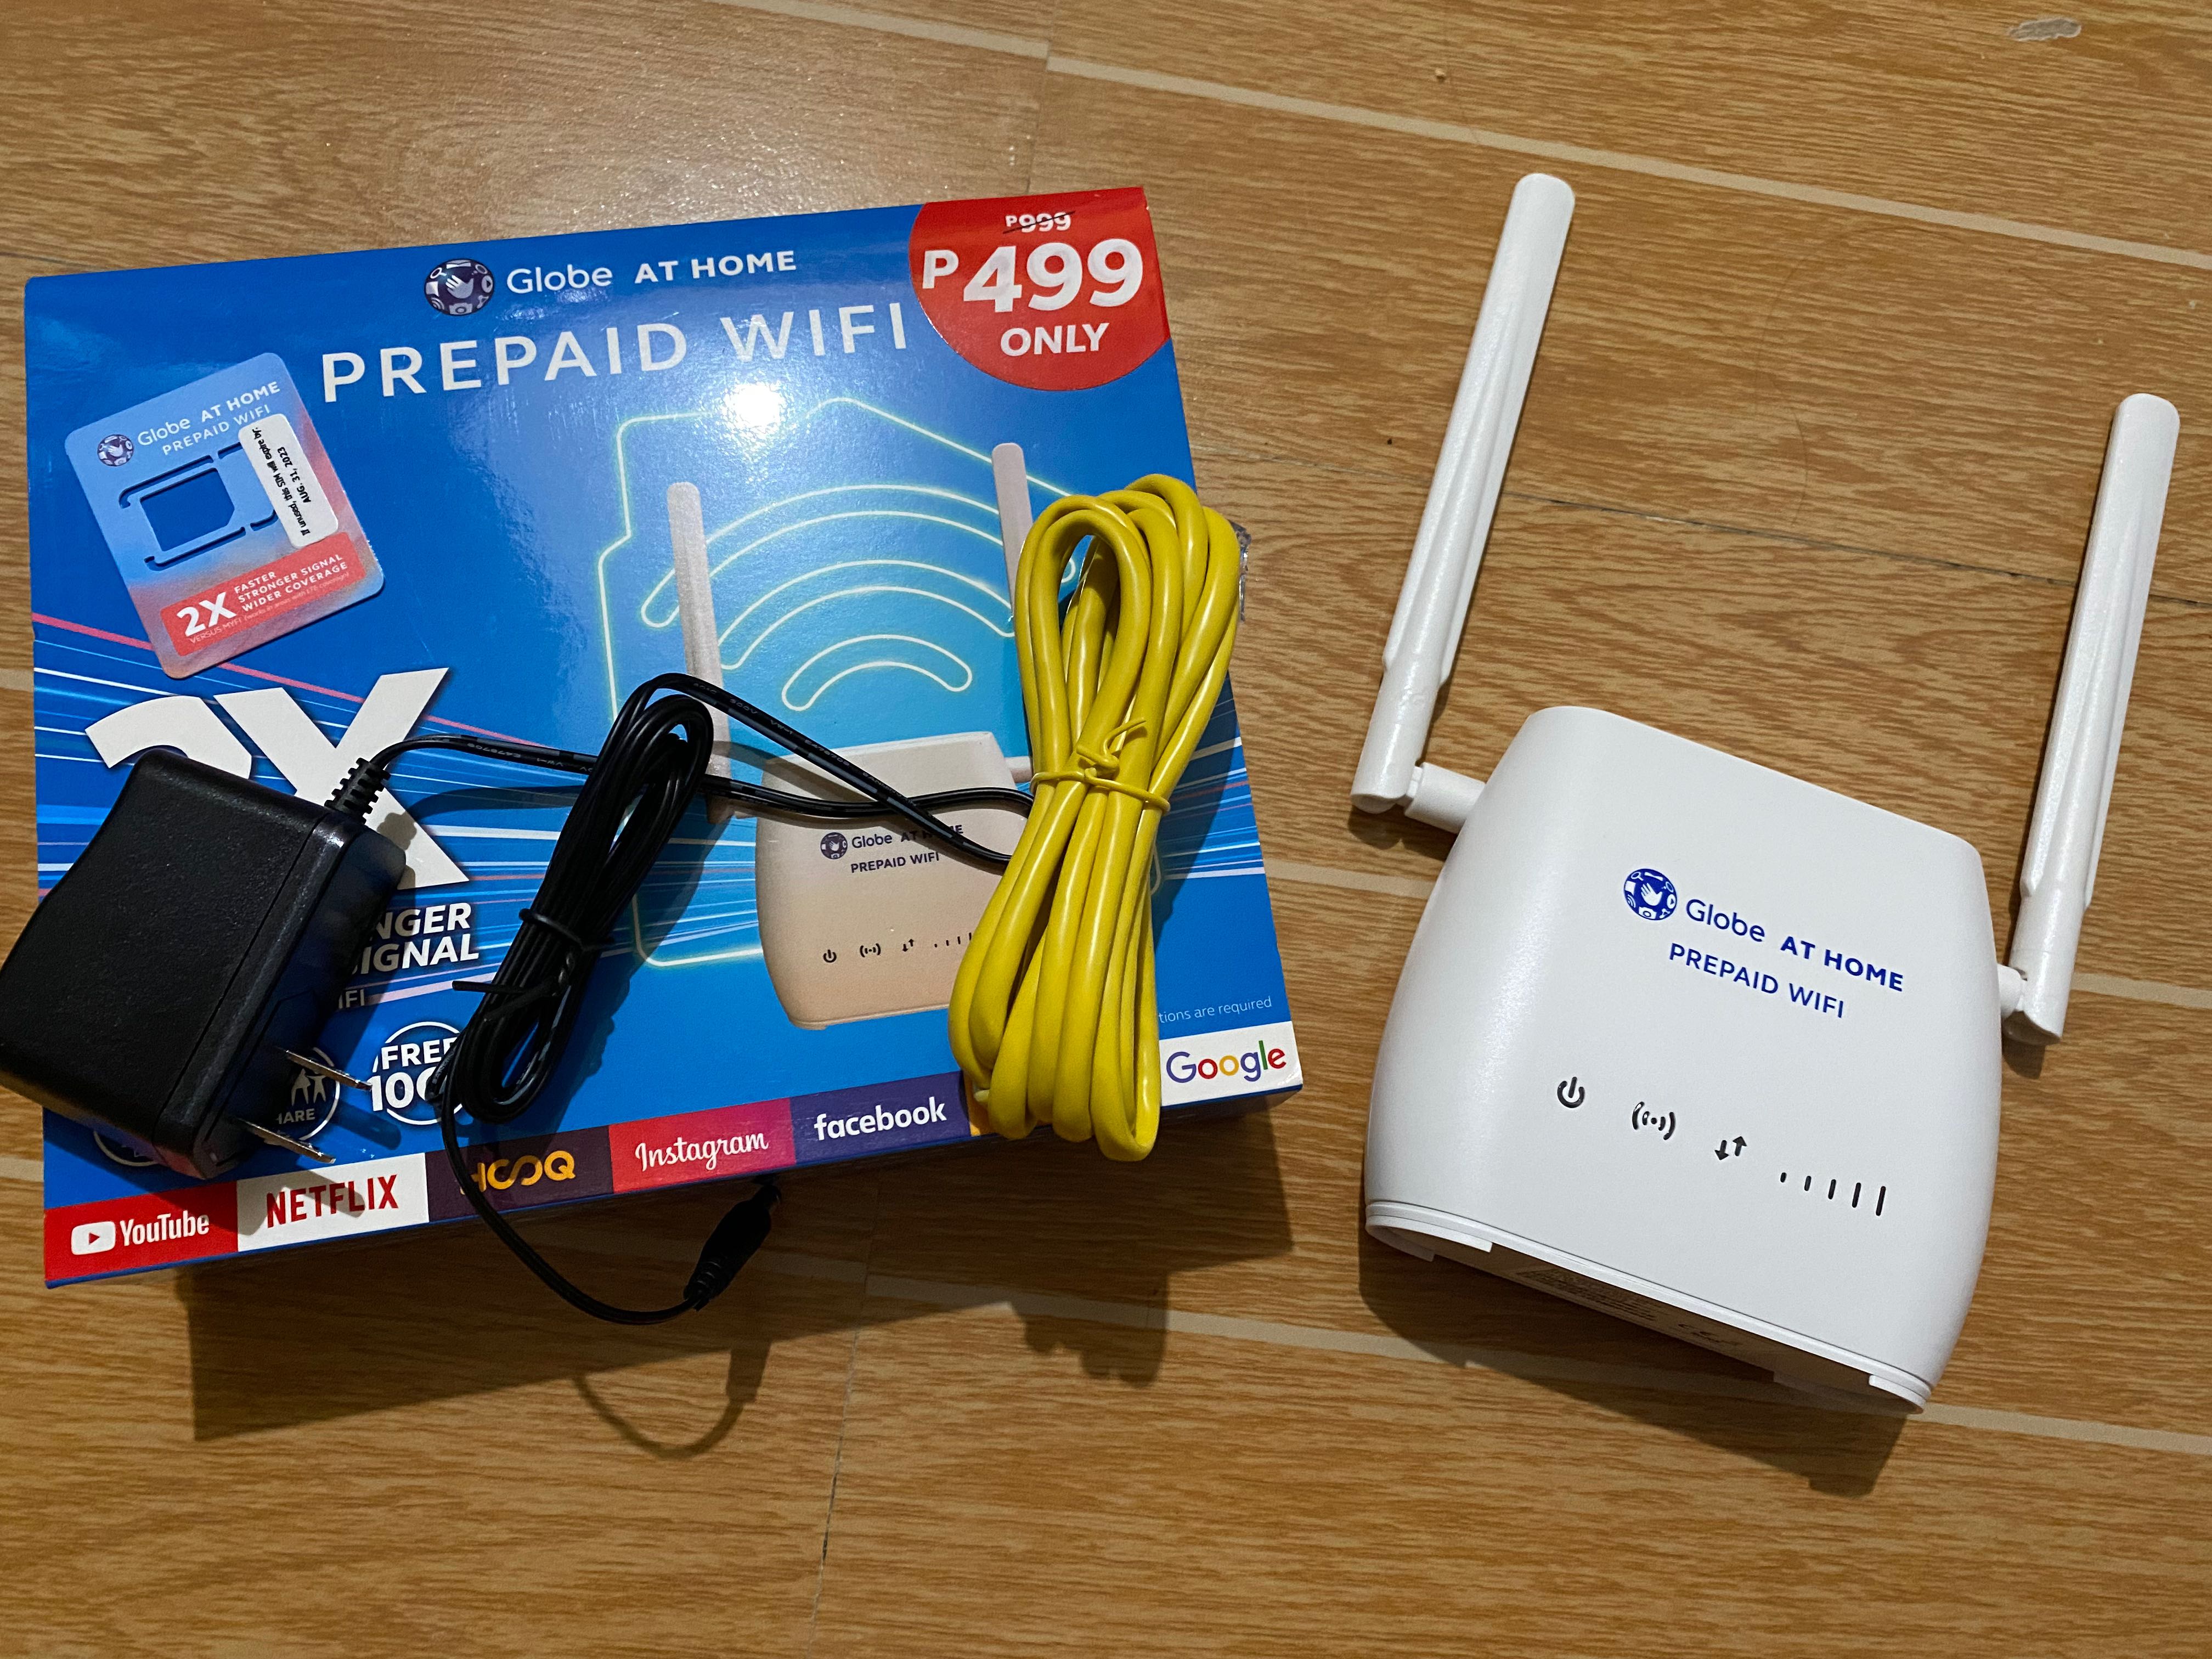 How to Hack Globe at Home Wifi Coupon - wide 6